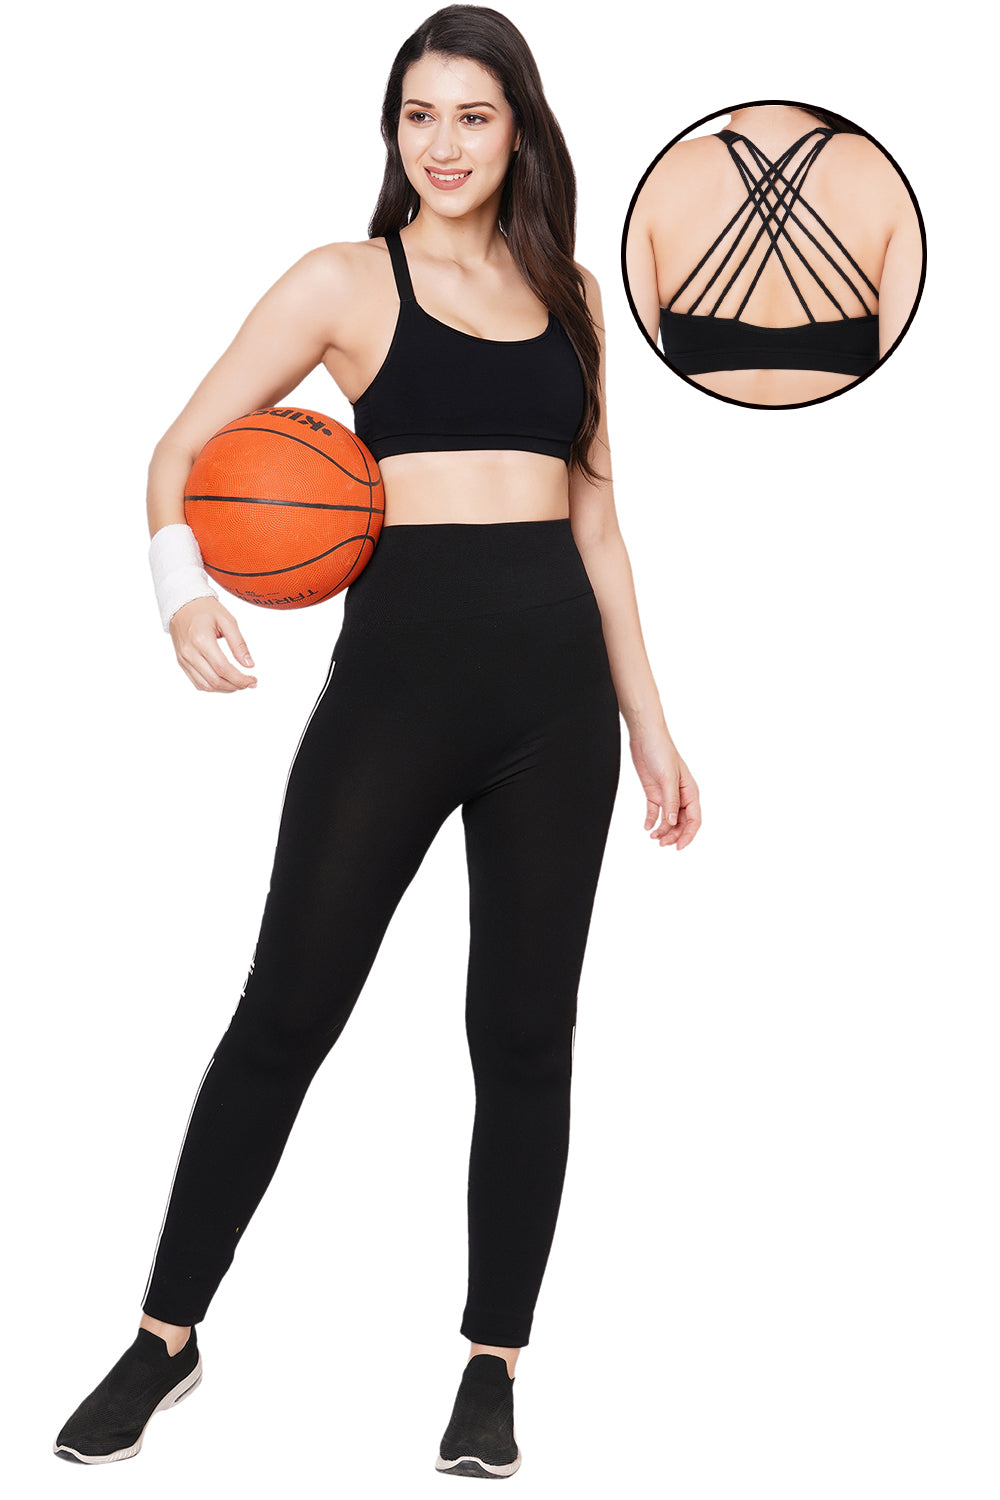 Sports Bra Built In Pads Photos, Download The BEST Free Sports Bra